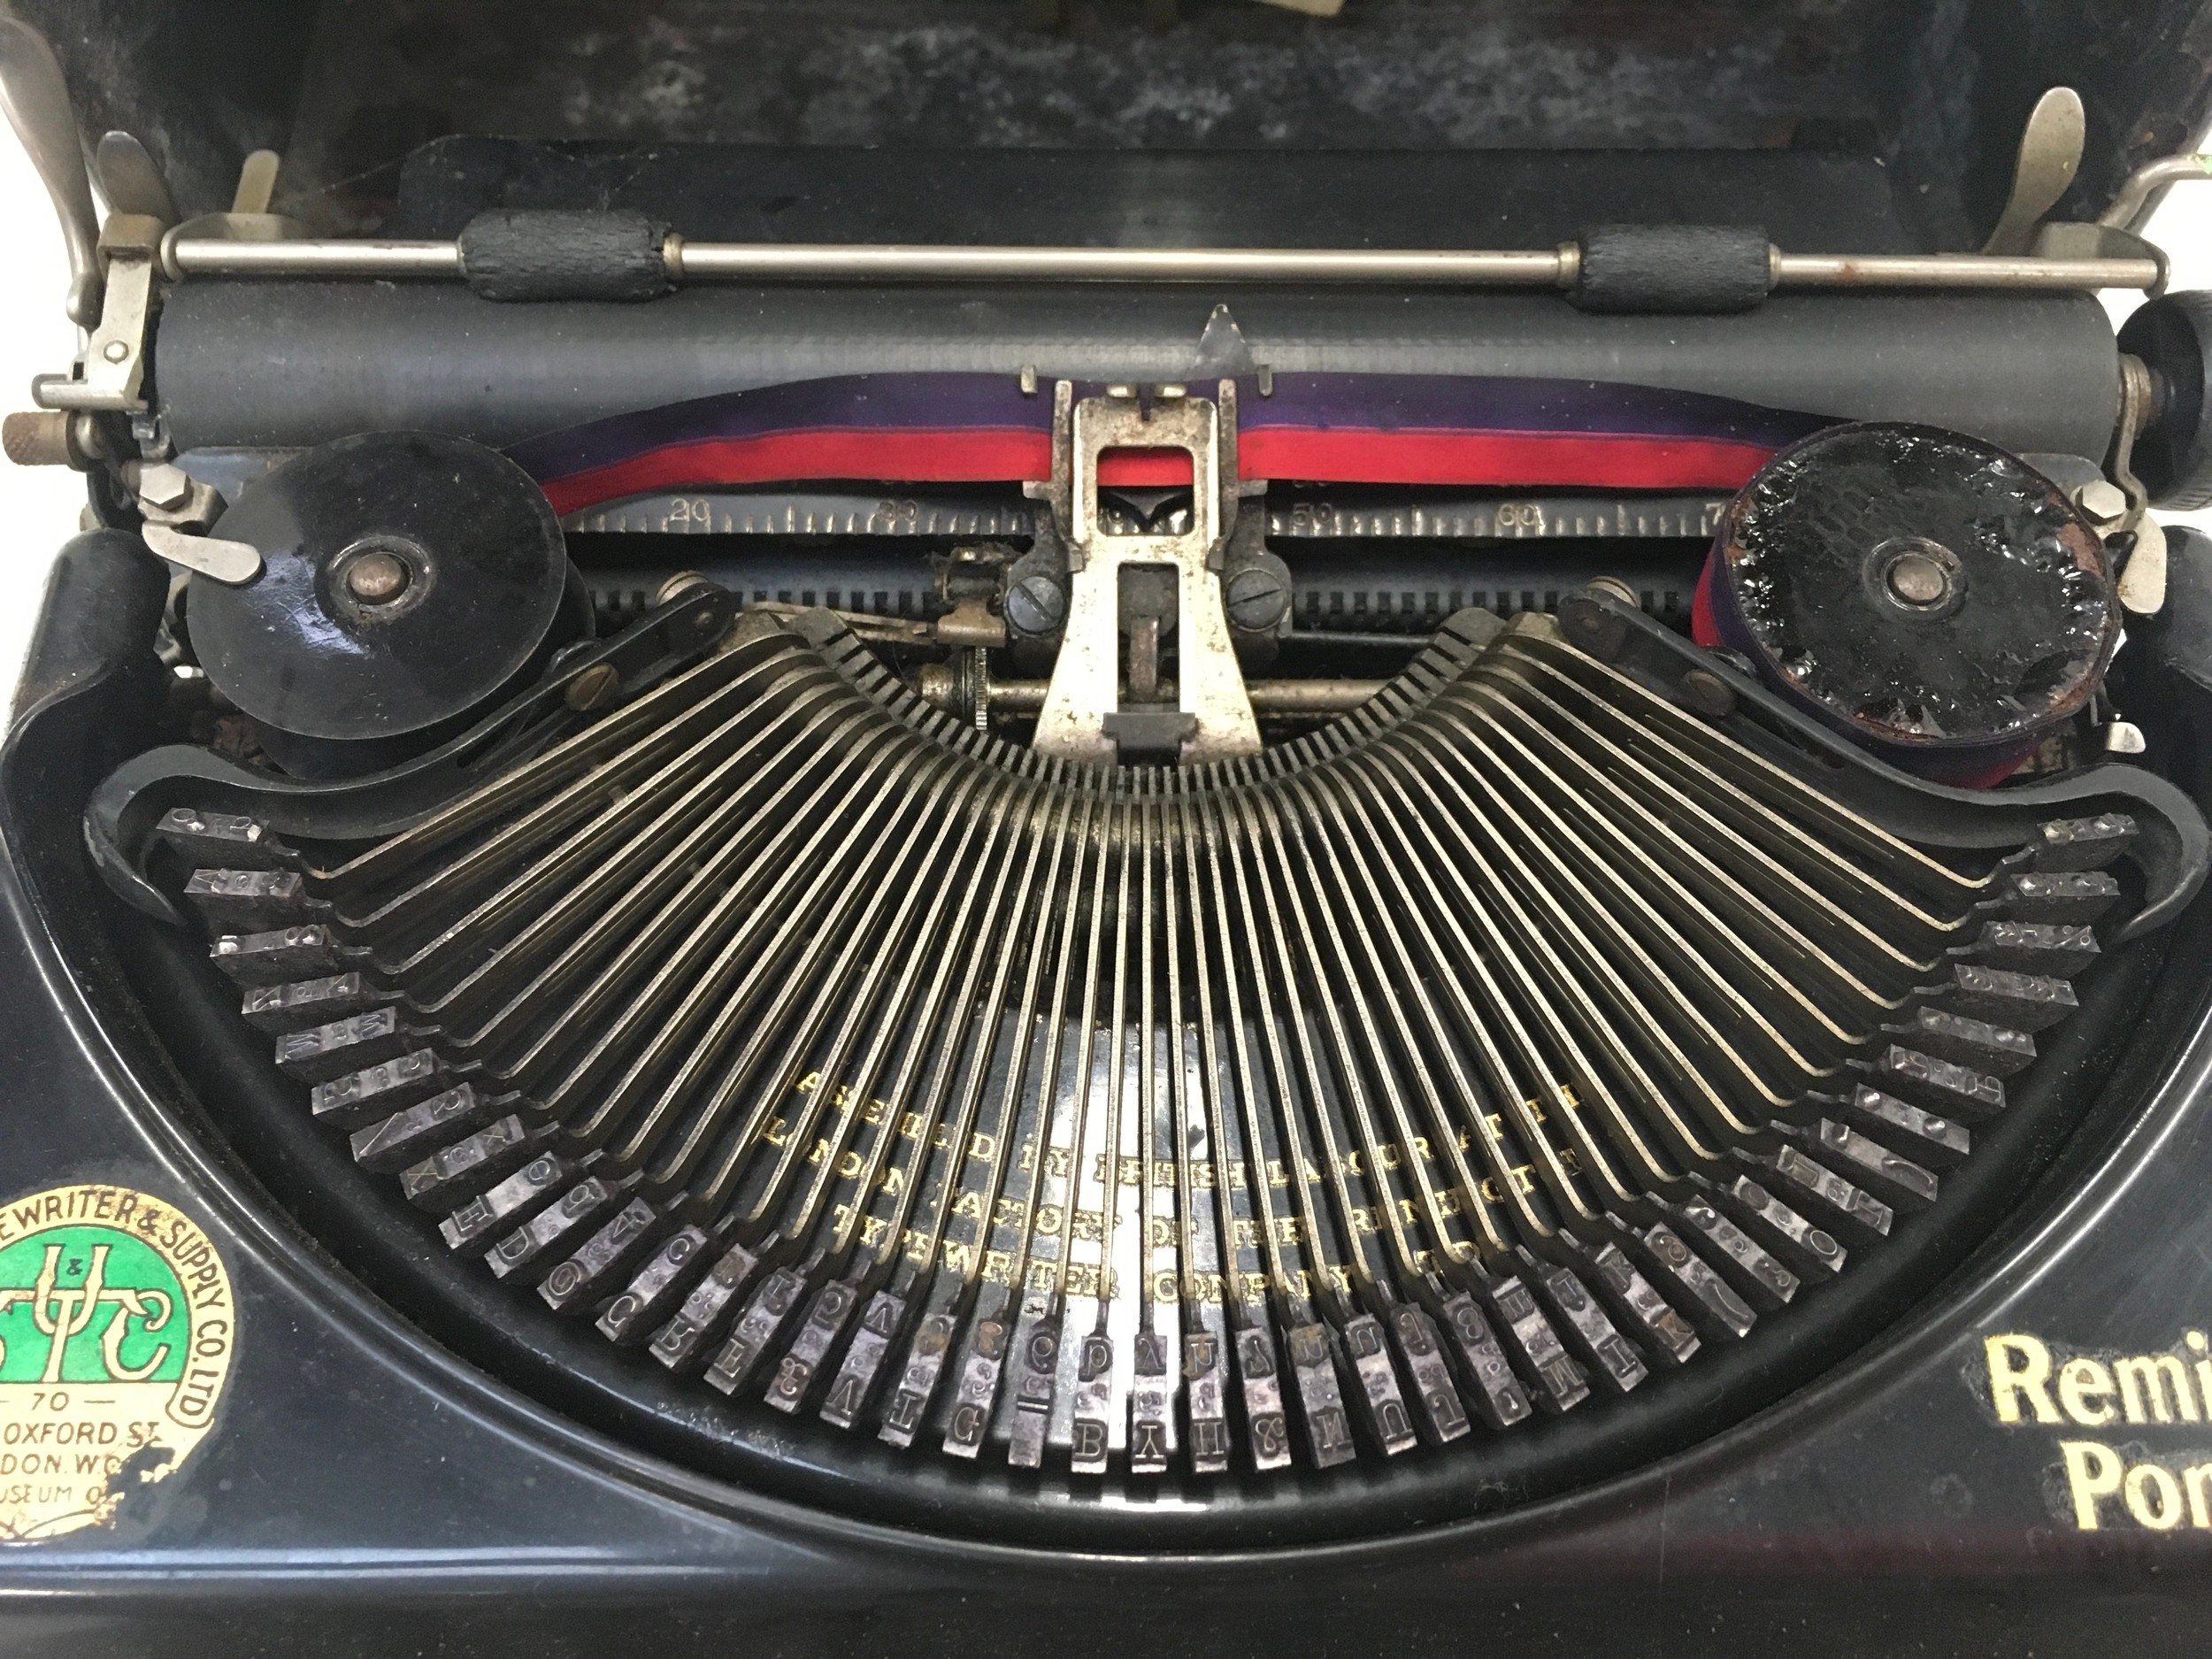 An early 1920's antique Remington typewriter in original case. - Image 3 of 5